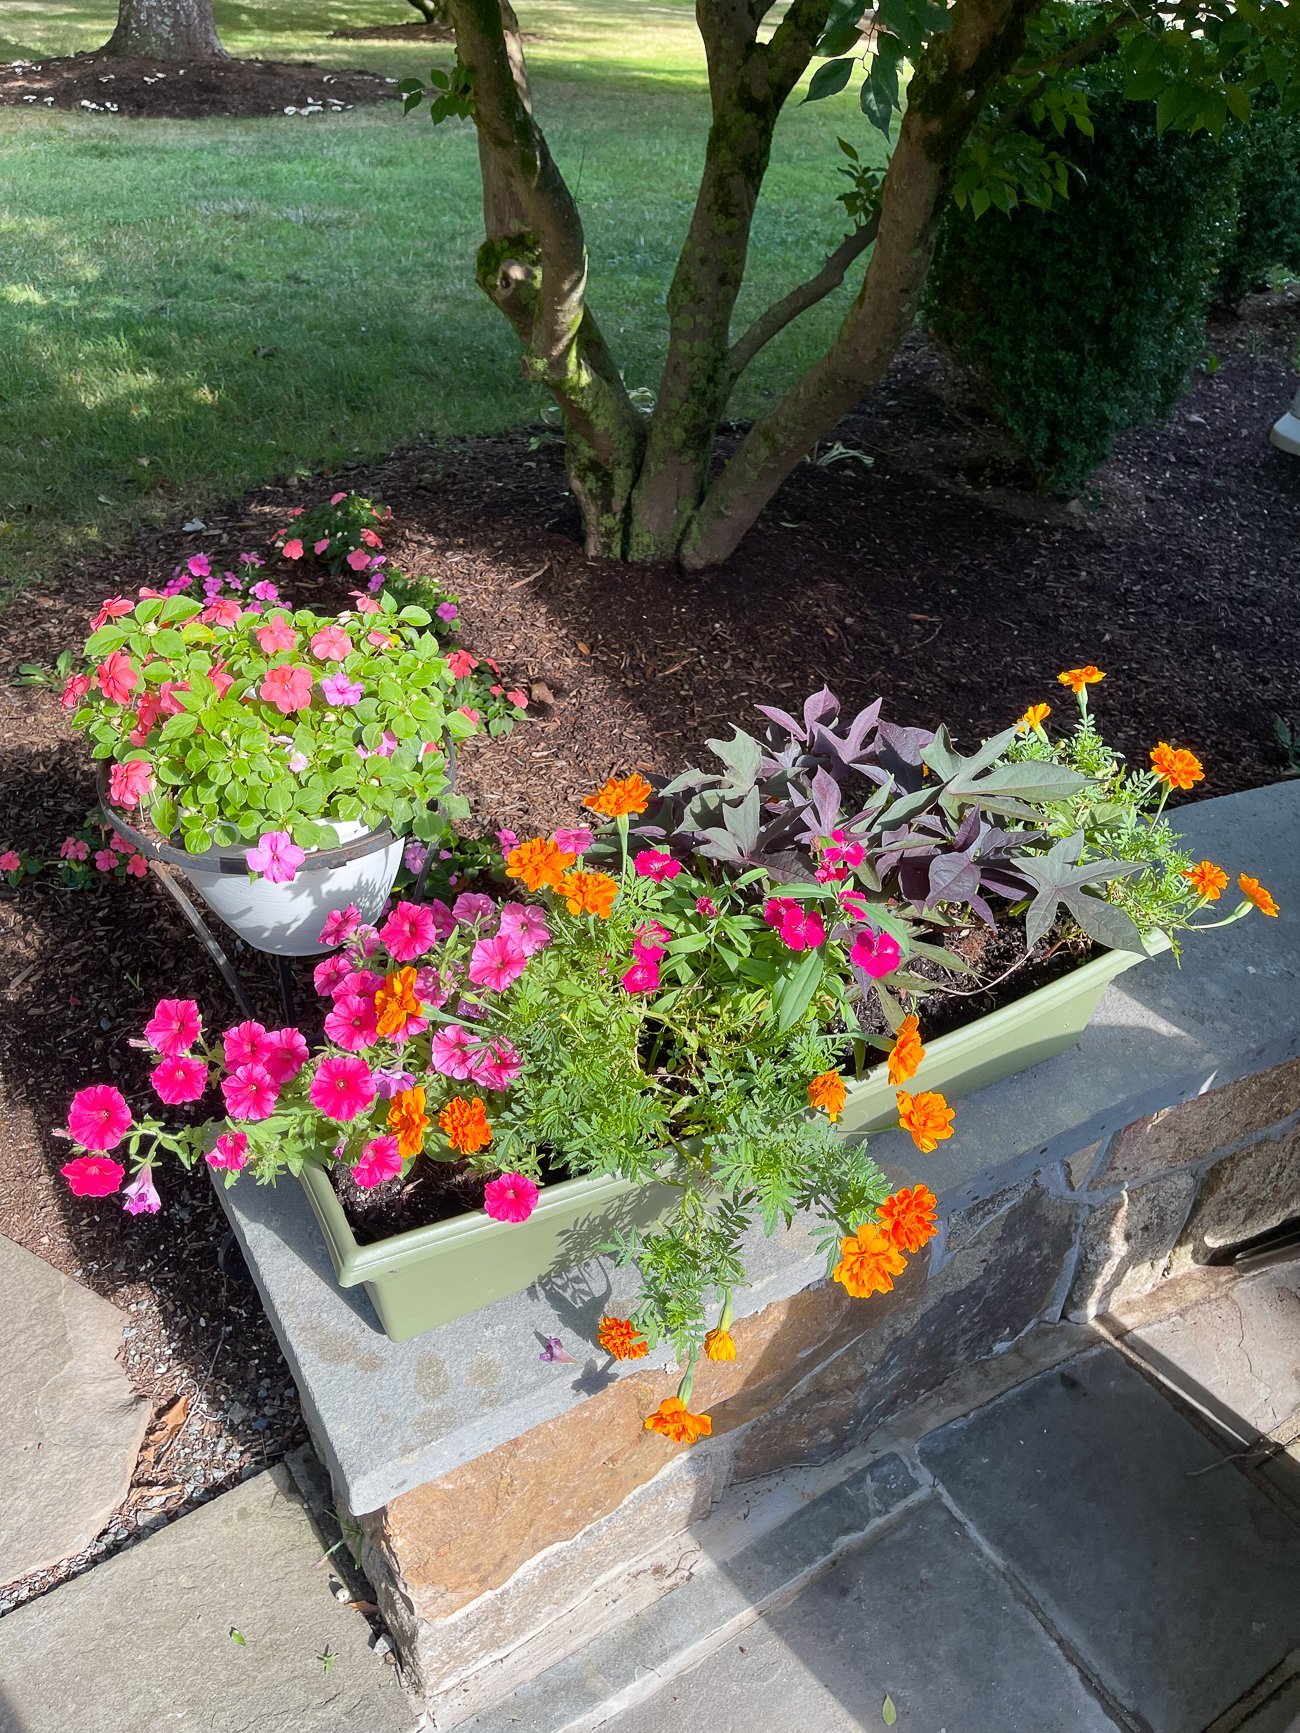 Flower box with petunias and marigolds